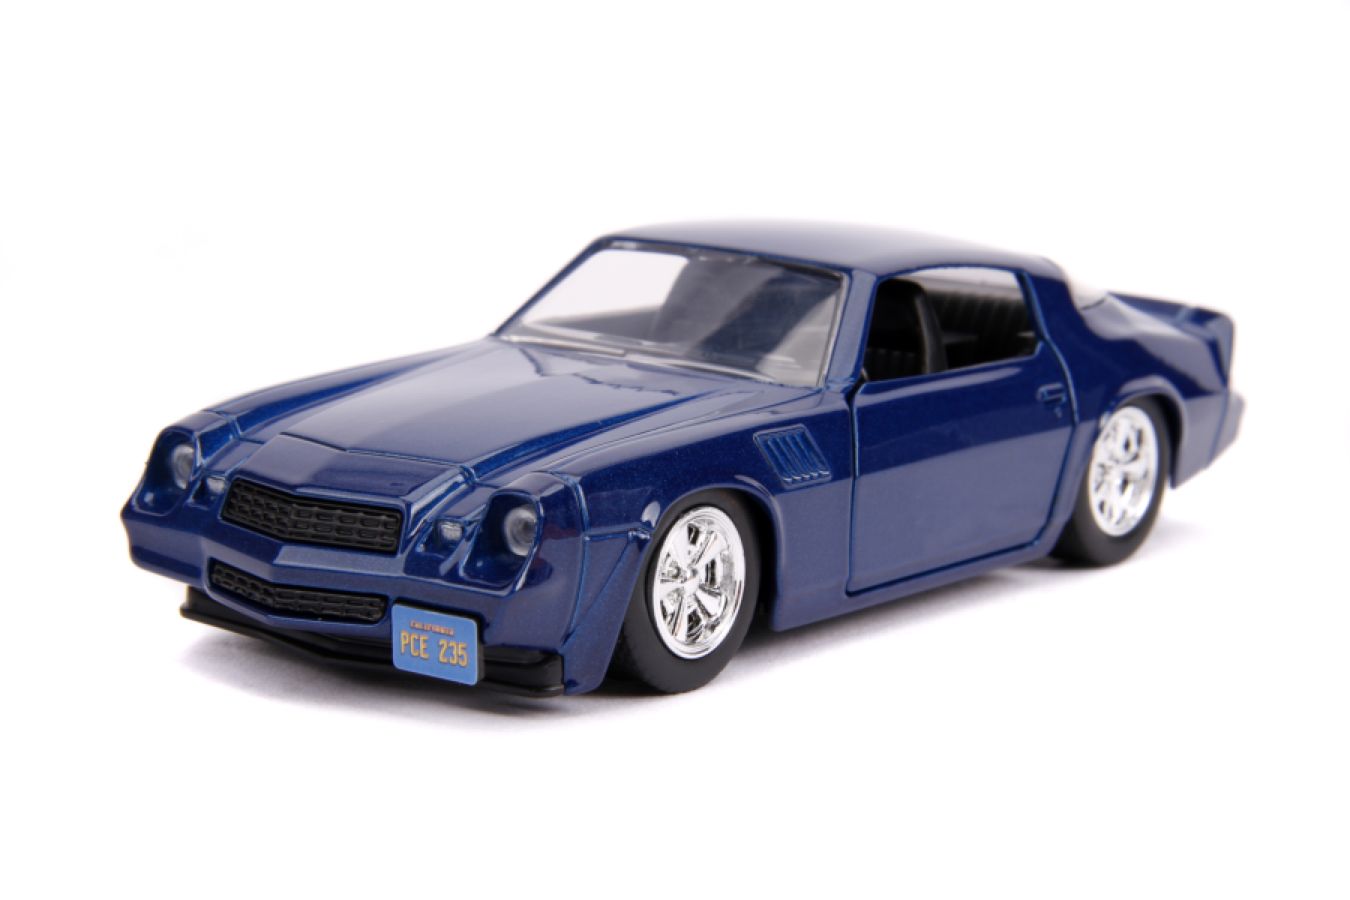 Stranger Things - 1979 Chevy Camero Z28 1:32 Hollywood Ride - Ozzie Collectables